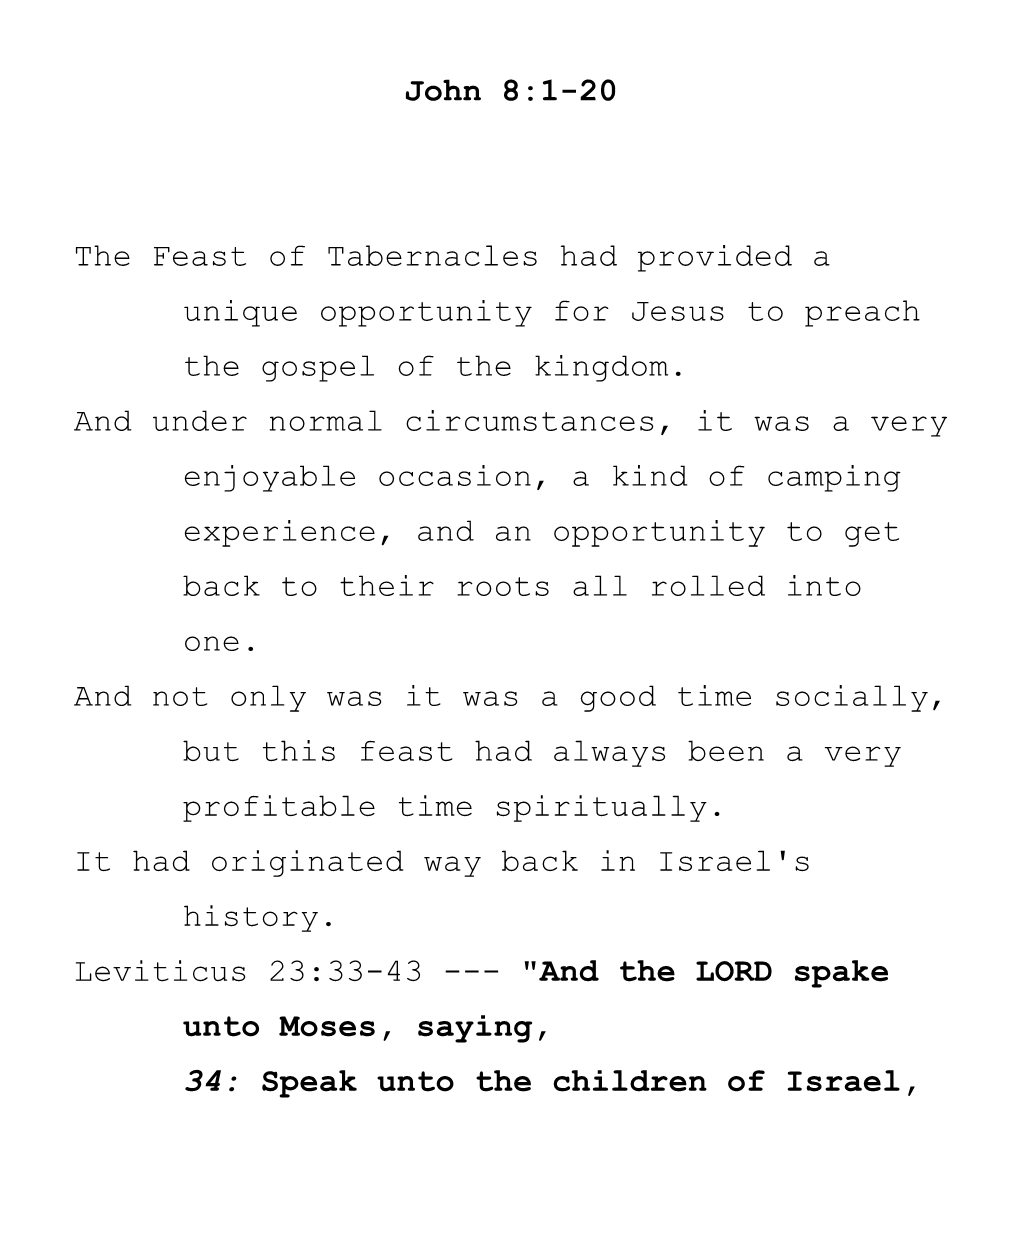 The Feast of Tabernacles Had Provided a Unique Opportunityfor Jesus to Preach the Gospel